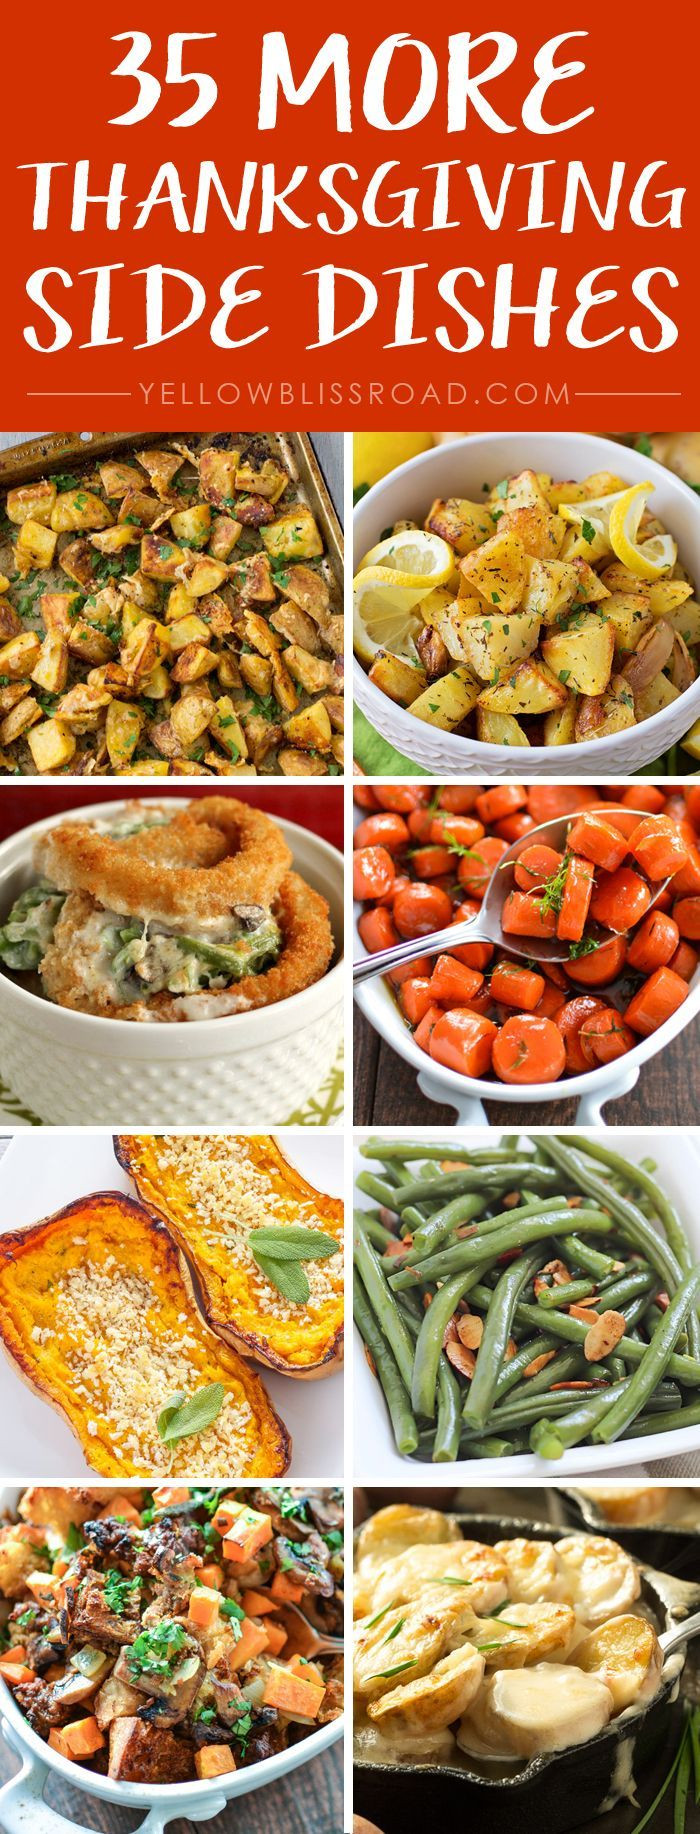 Thanksgiving Dinner Sides Ideas
 17 Best images about Thanksgiving ideas on Pinterest